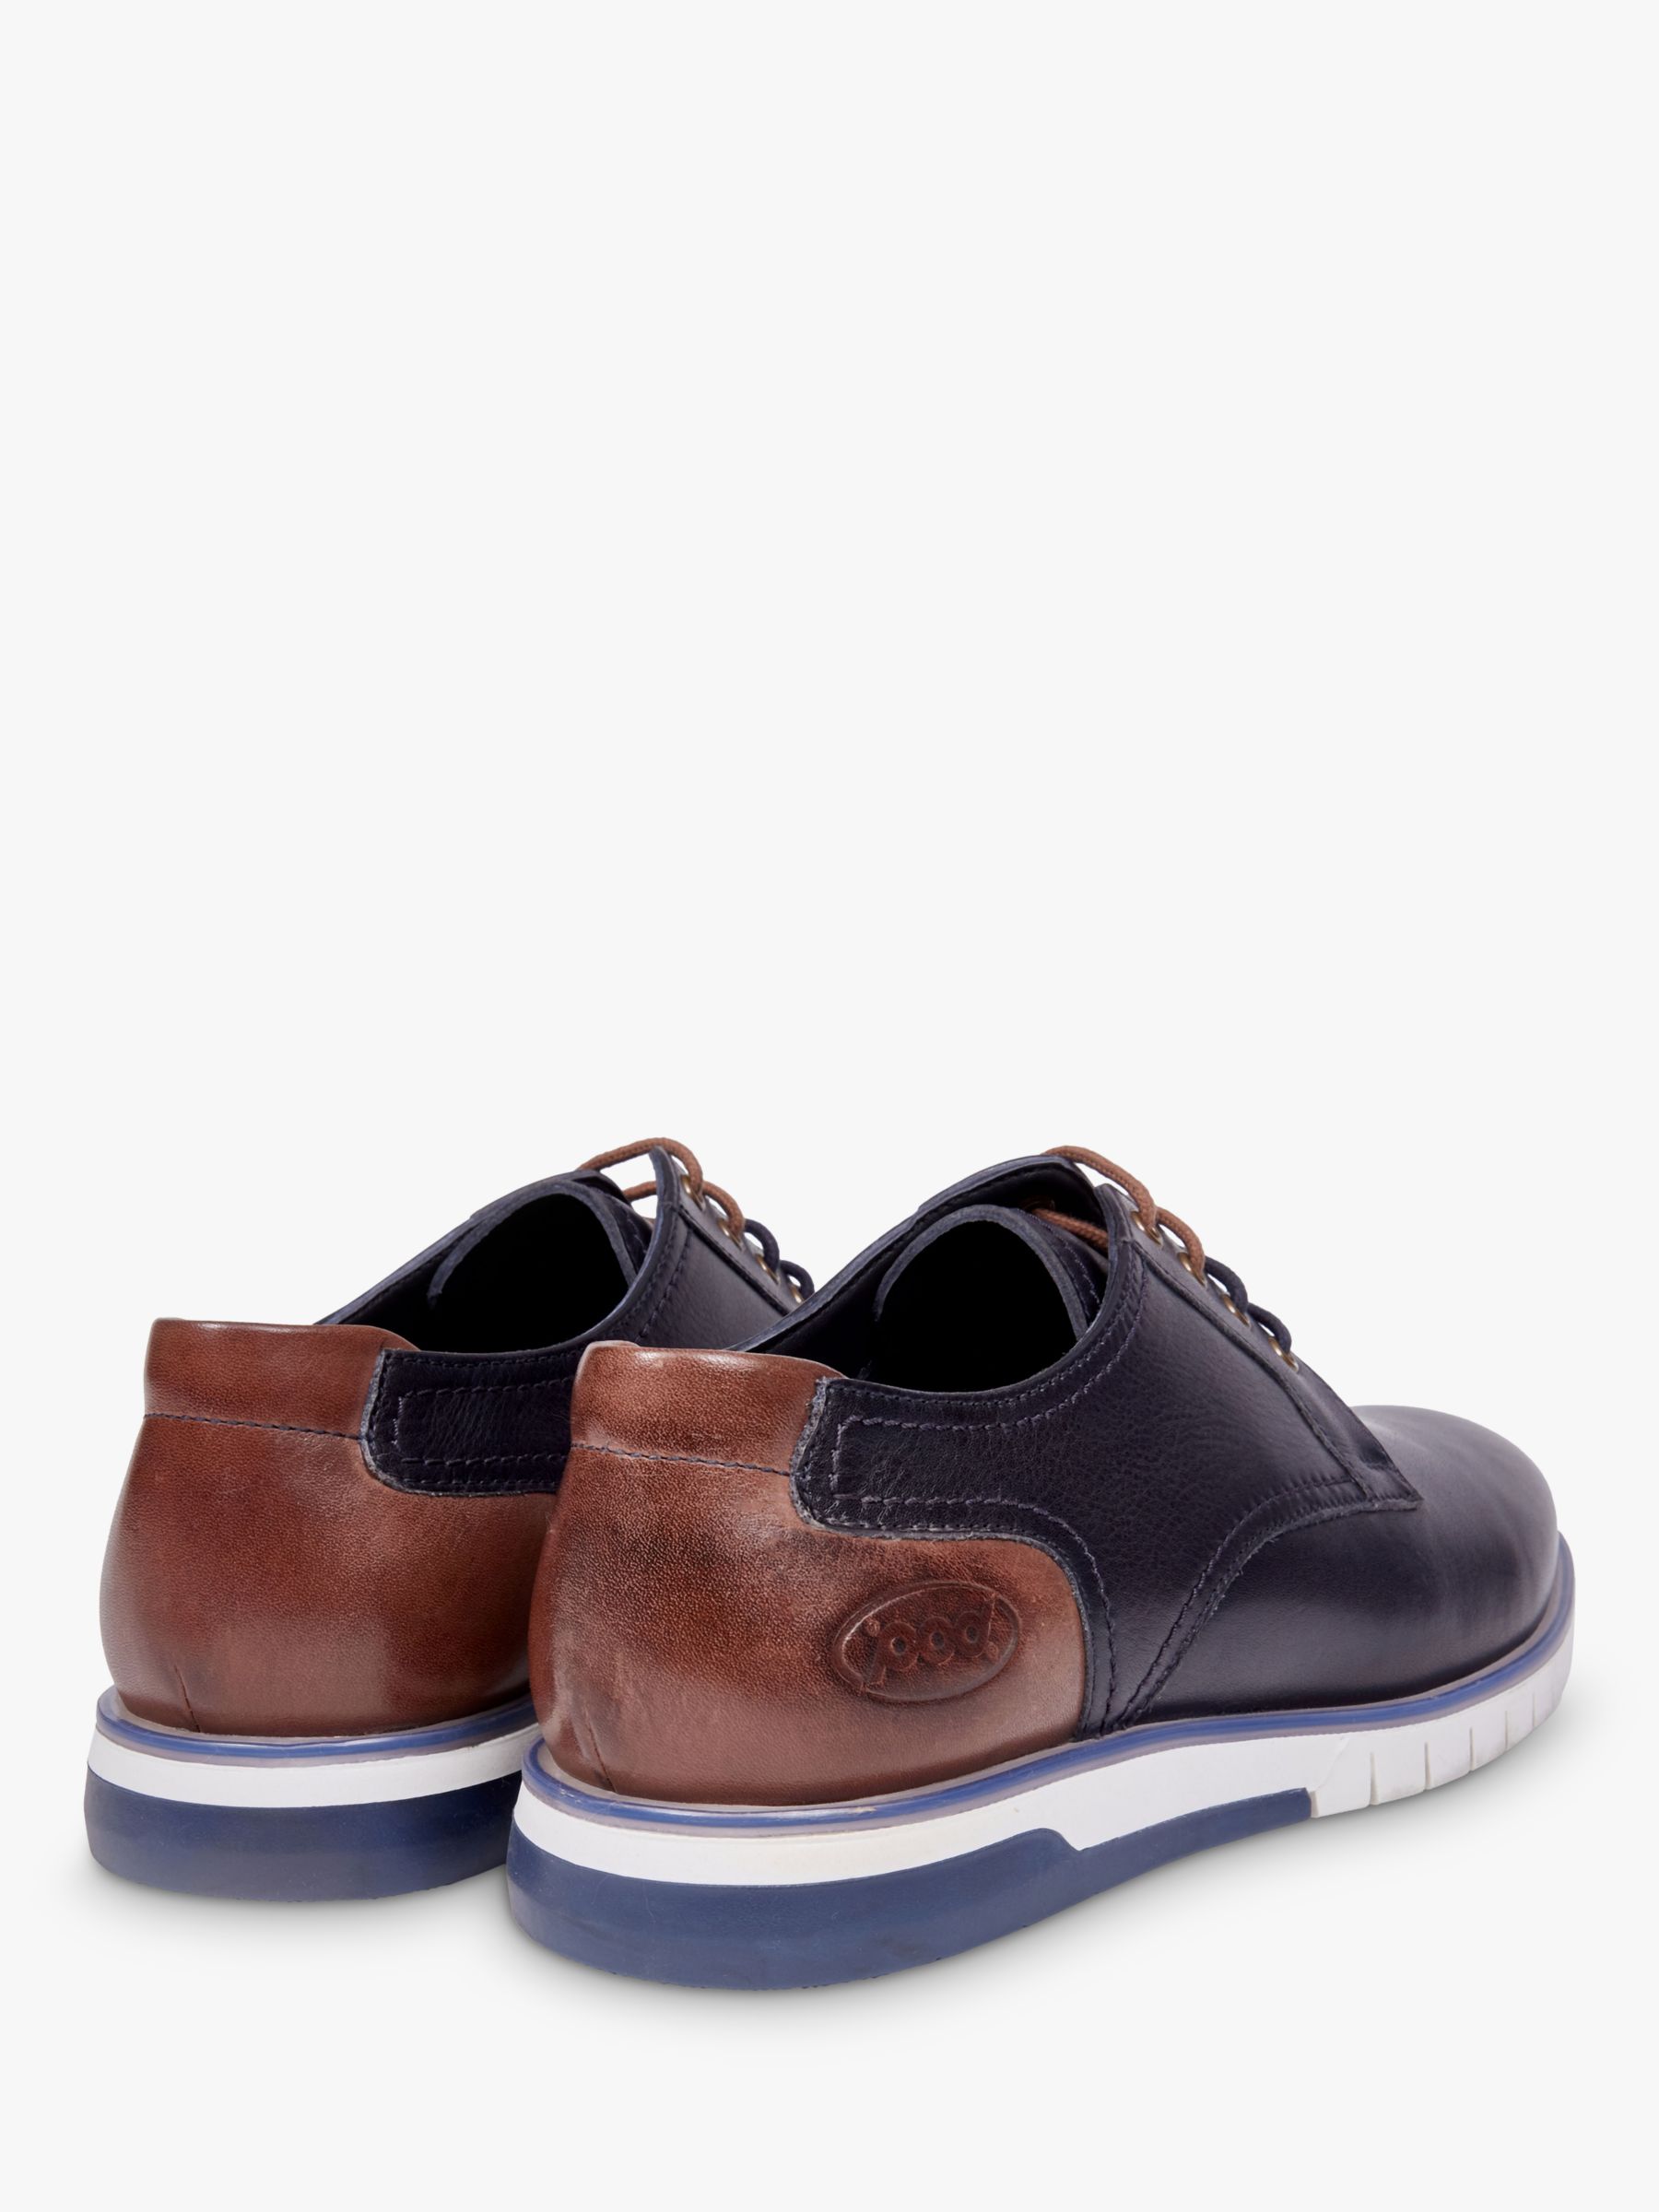 Pod Cillian Casual Leather Shoe, Navy at John Lewis & Partners